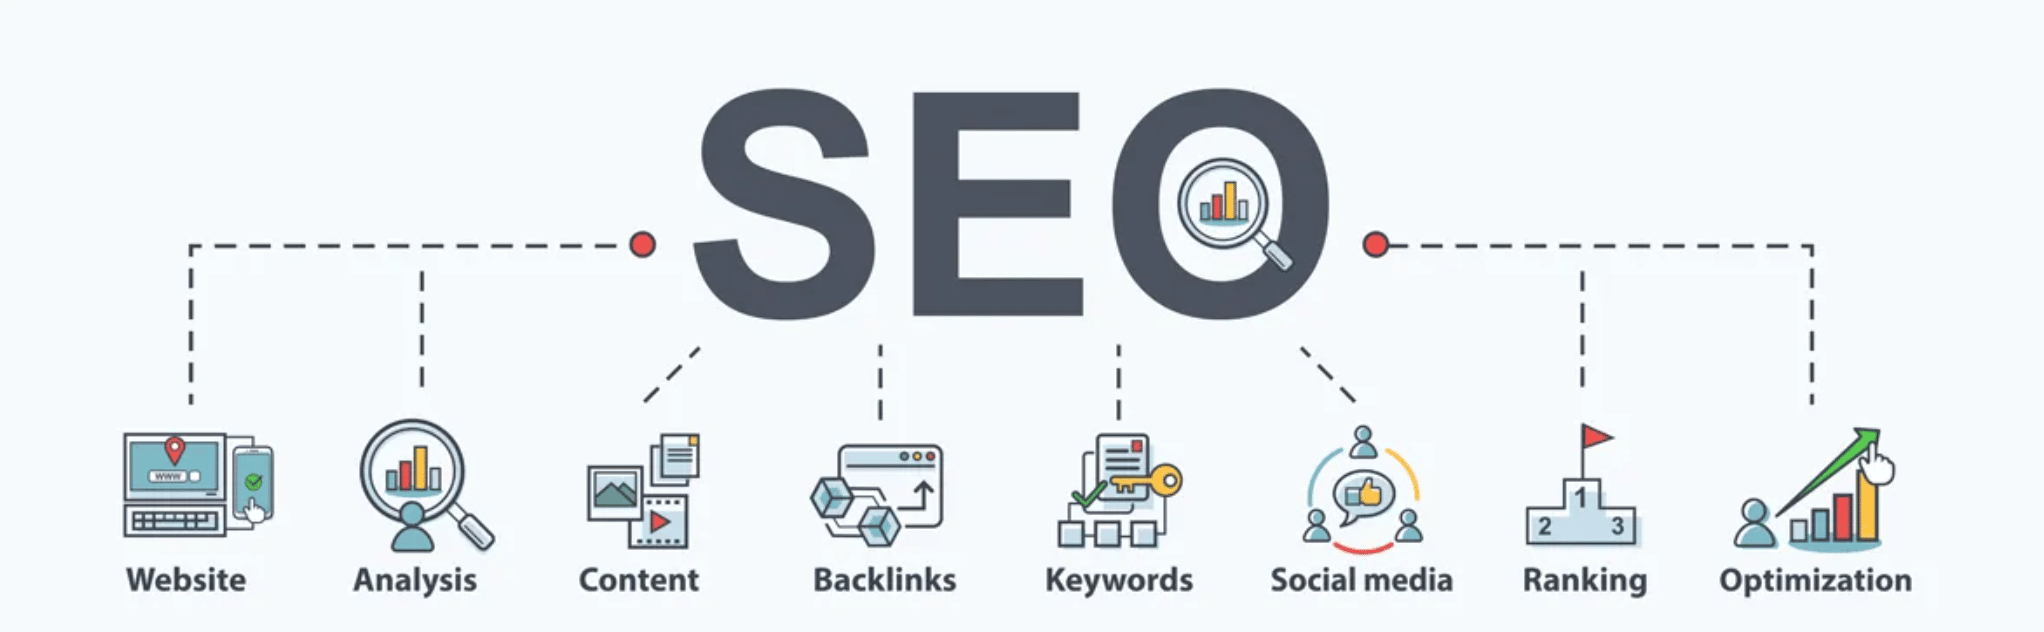 infographic depicting several factors that make up search engine optimization